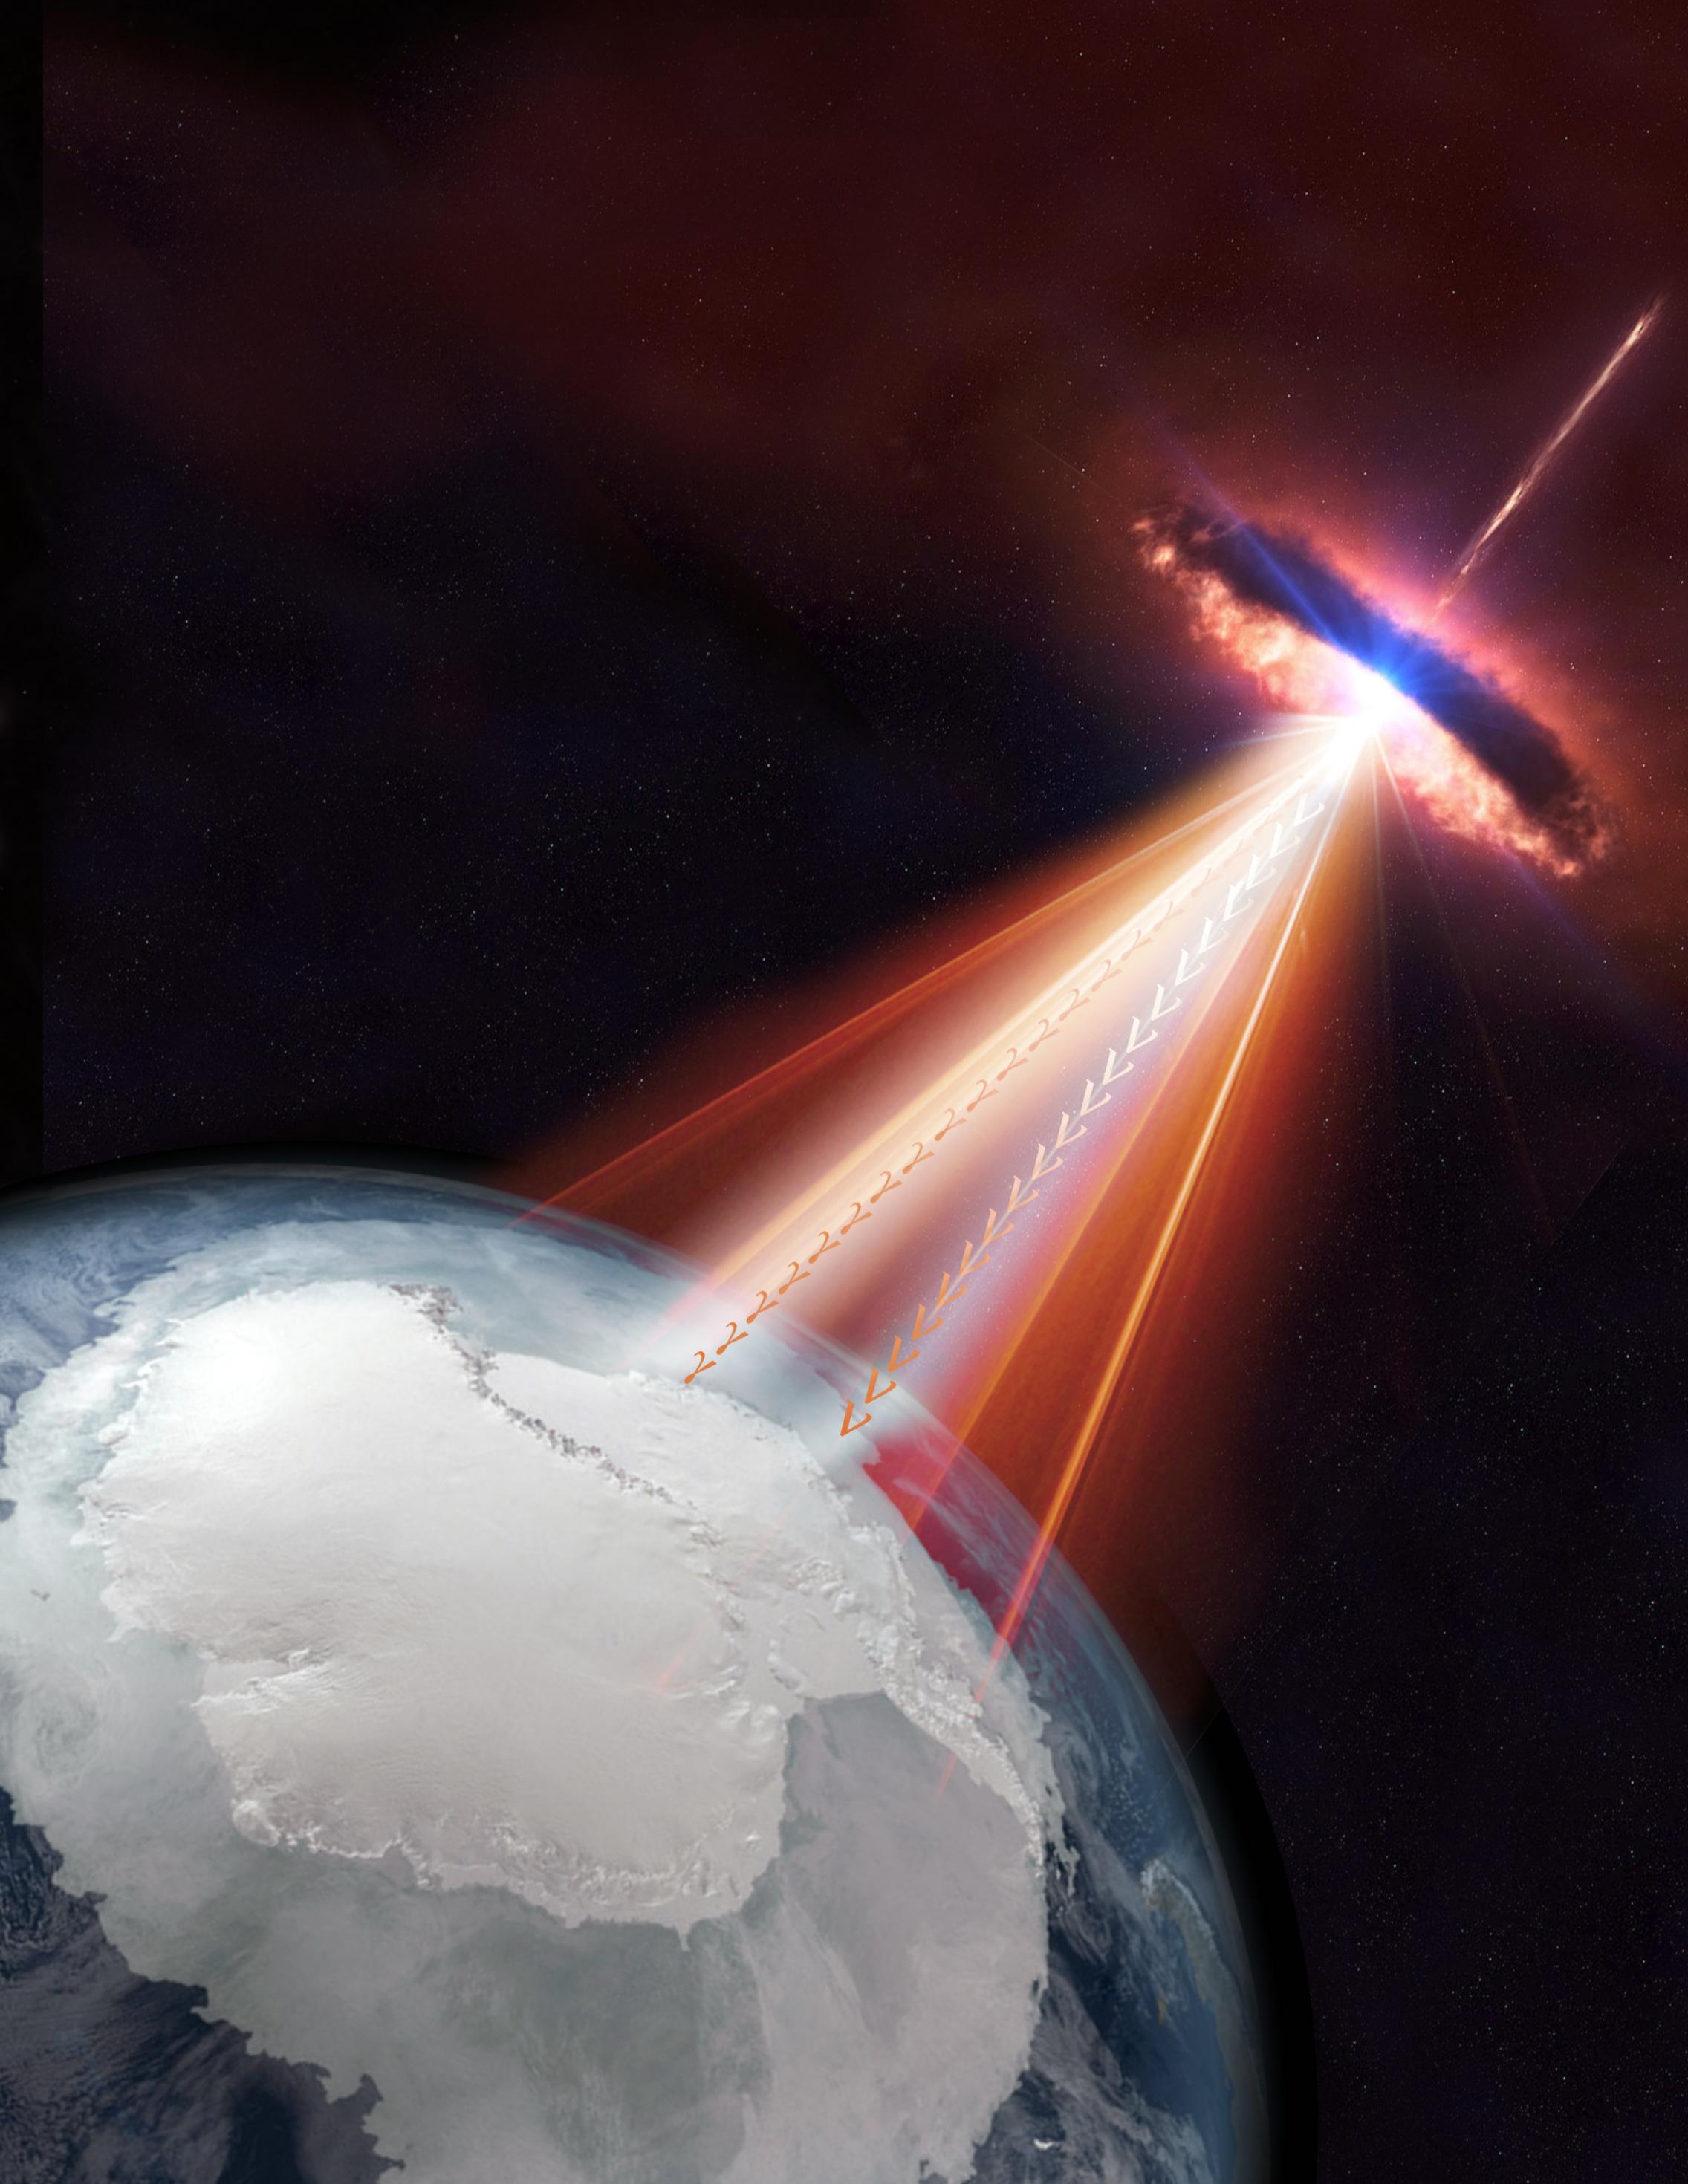 Blazars are a type of active galaxy with one of its jets pointing toward us. In this artistic rendering, a blazar emits both neutrinos and gamma rays that could be detected by the IceCube Neutrino Observatory as well as by other telescopes on Earth and in space. Credit: IceCube/NASA